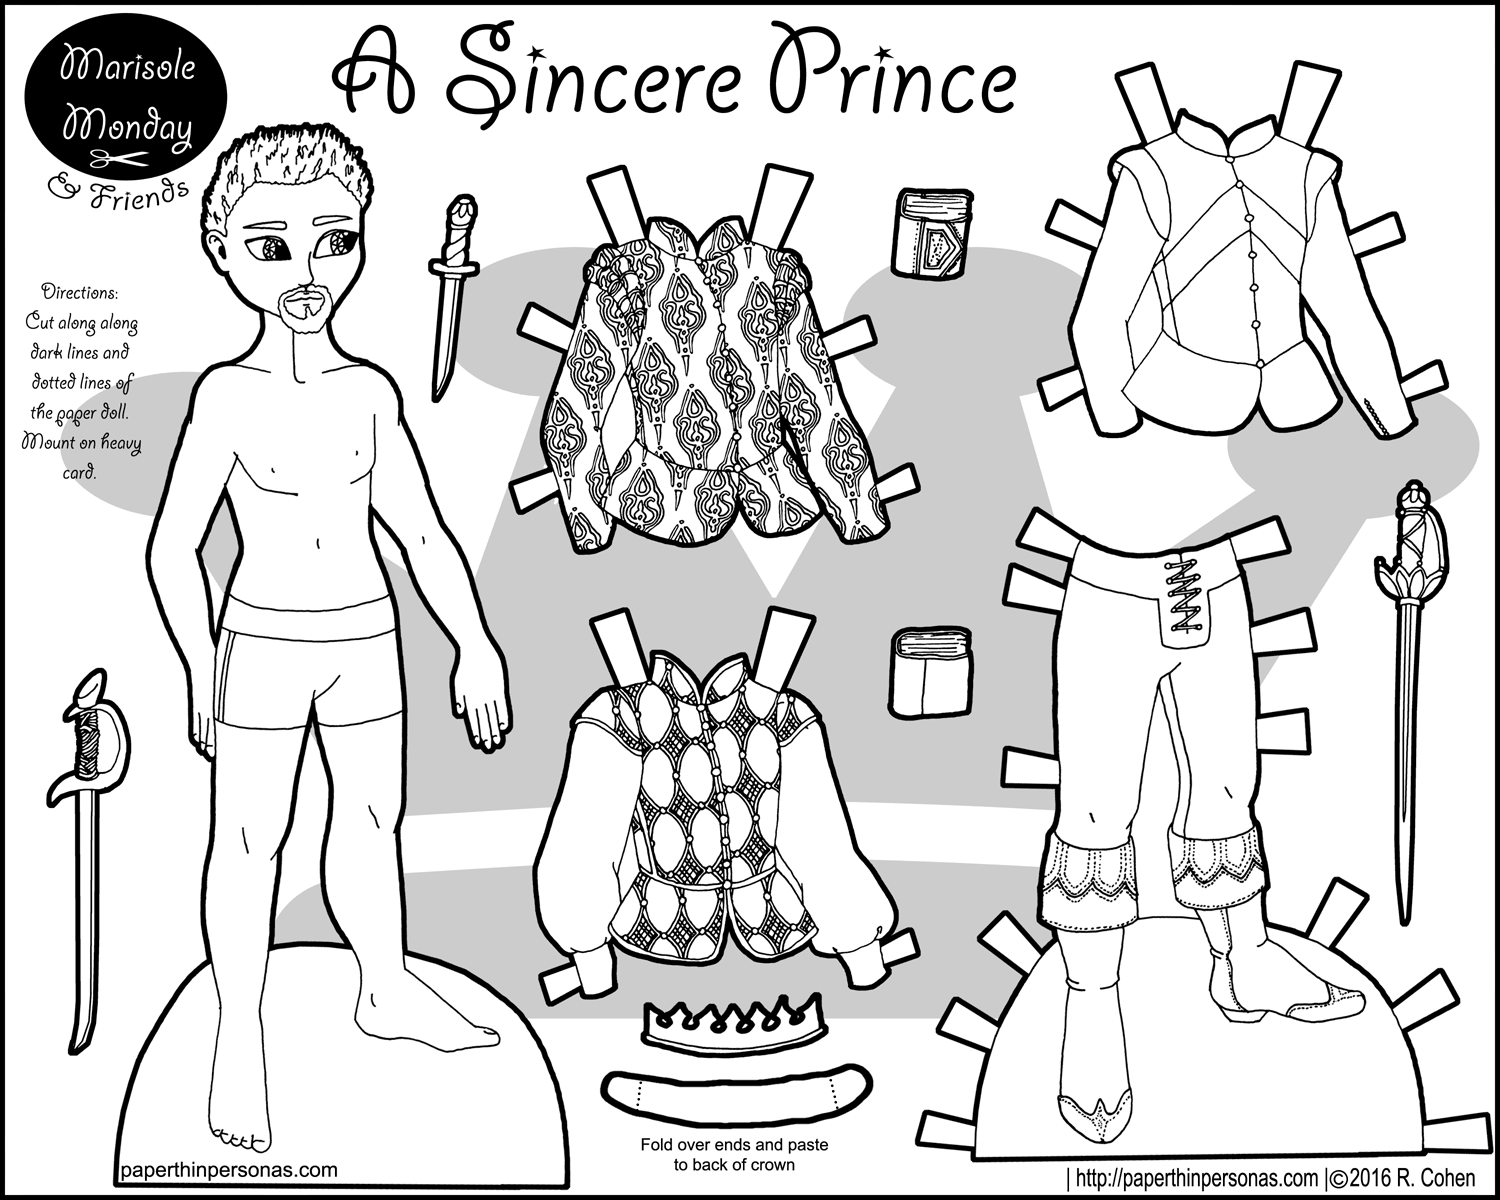 Marcus Sincere Prince Paper Doll Bw Png 1500 1200 Paper Dolls Paper Dolls Clothing Princess Paper Dolls